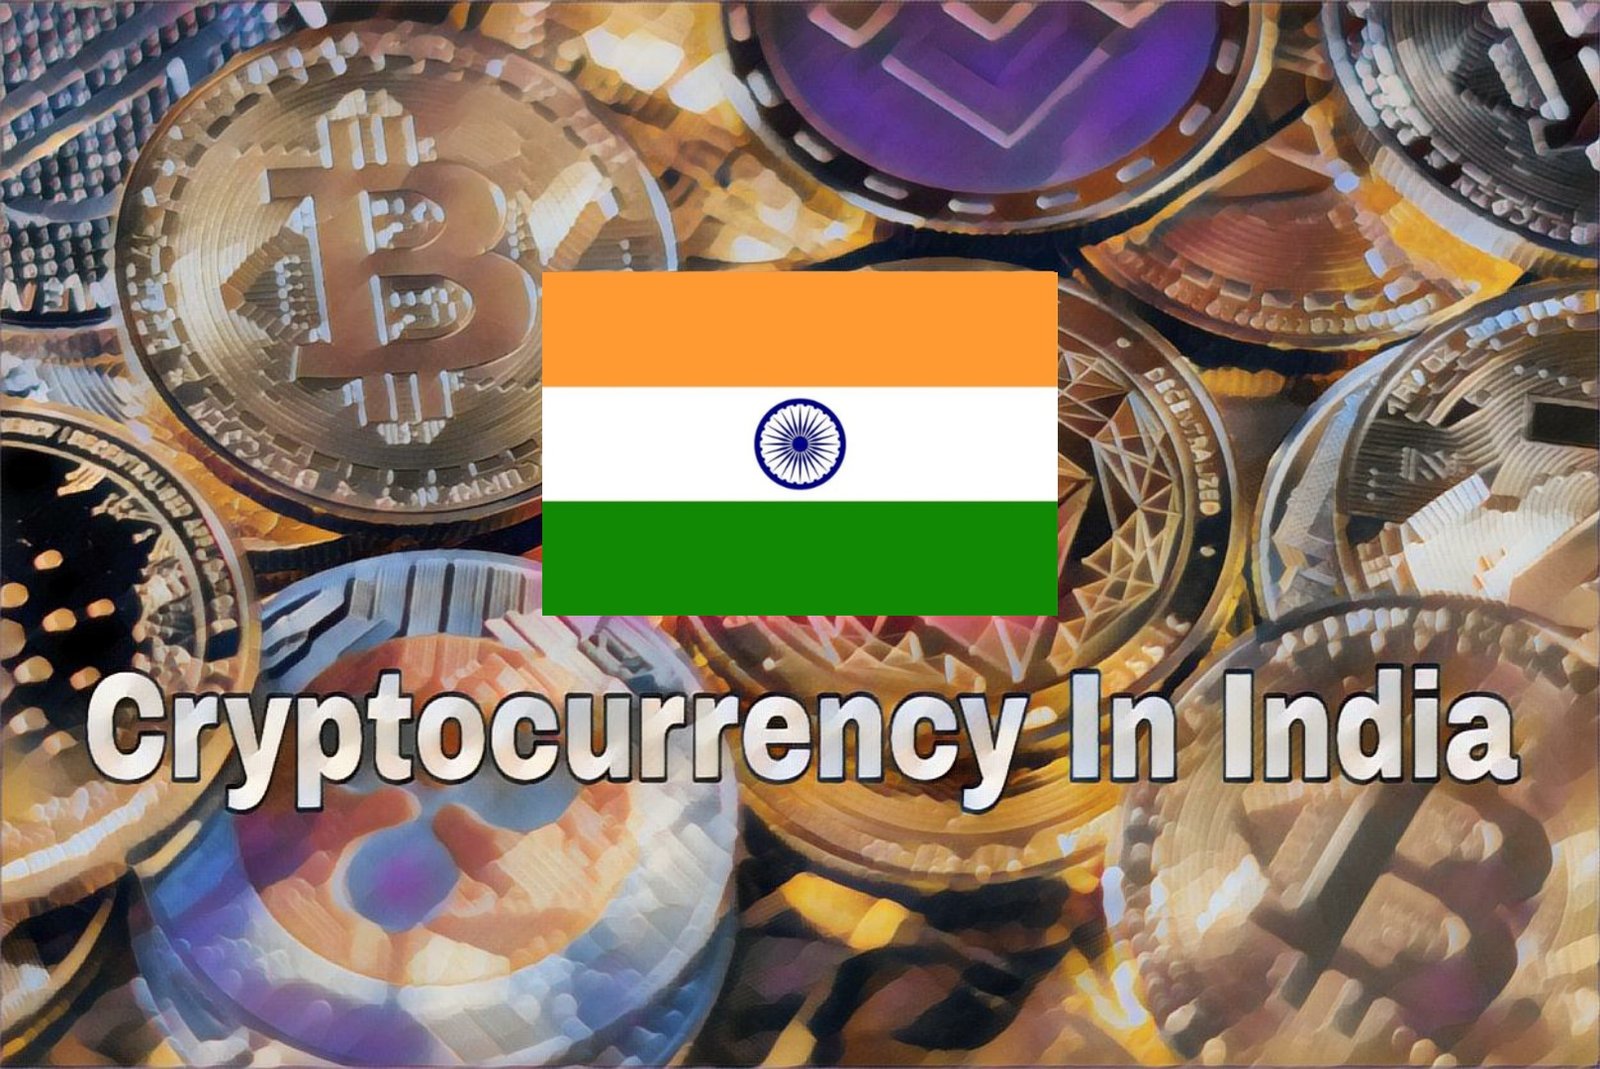 Cryptocurrency Legal or illegal in India